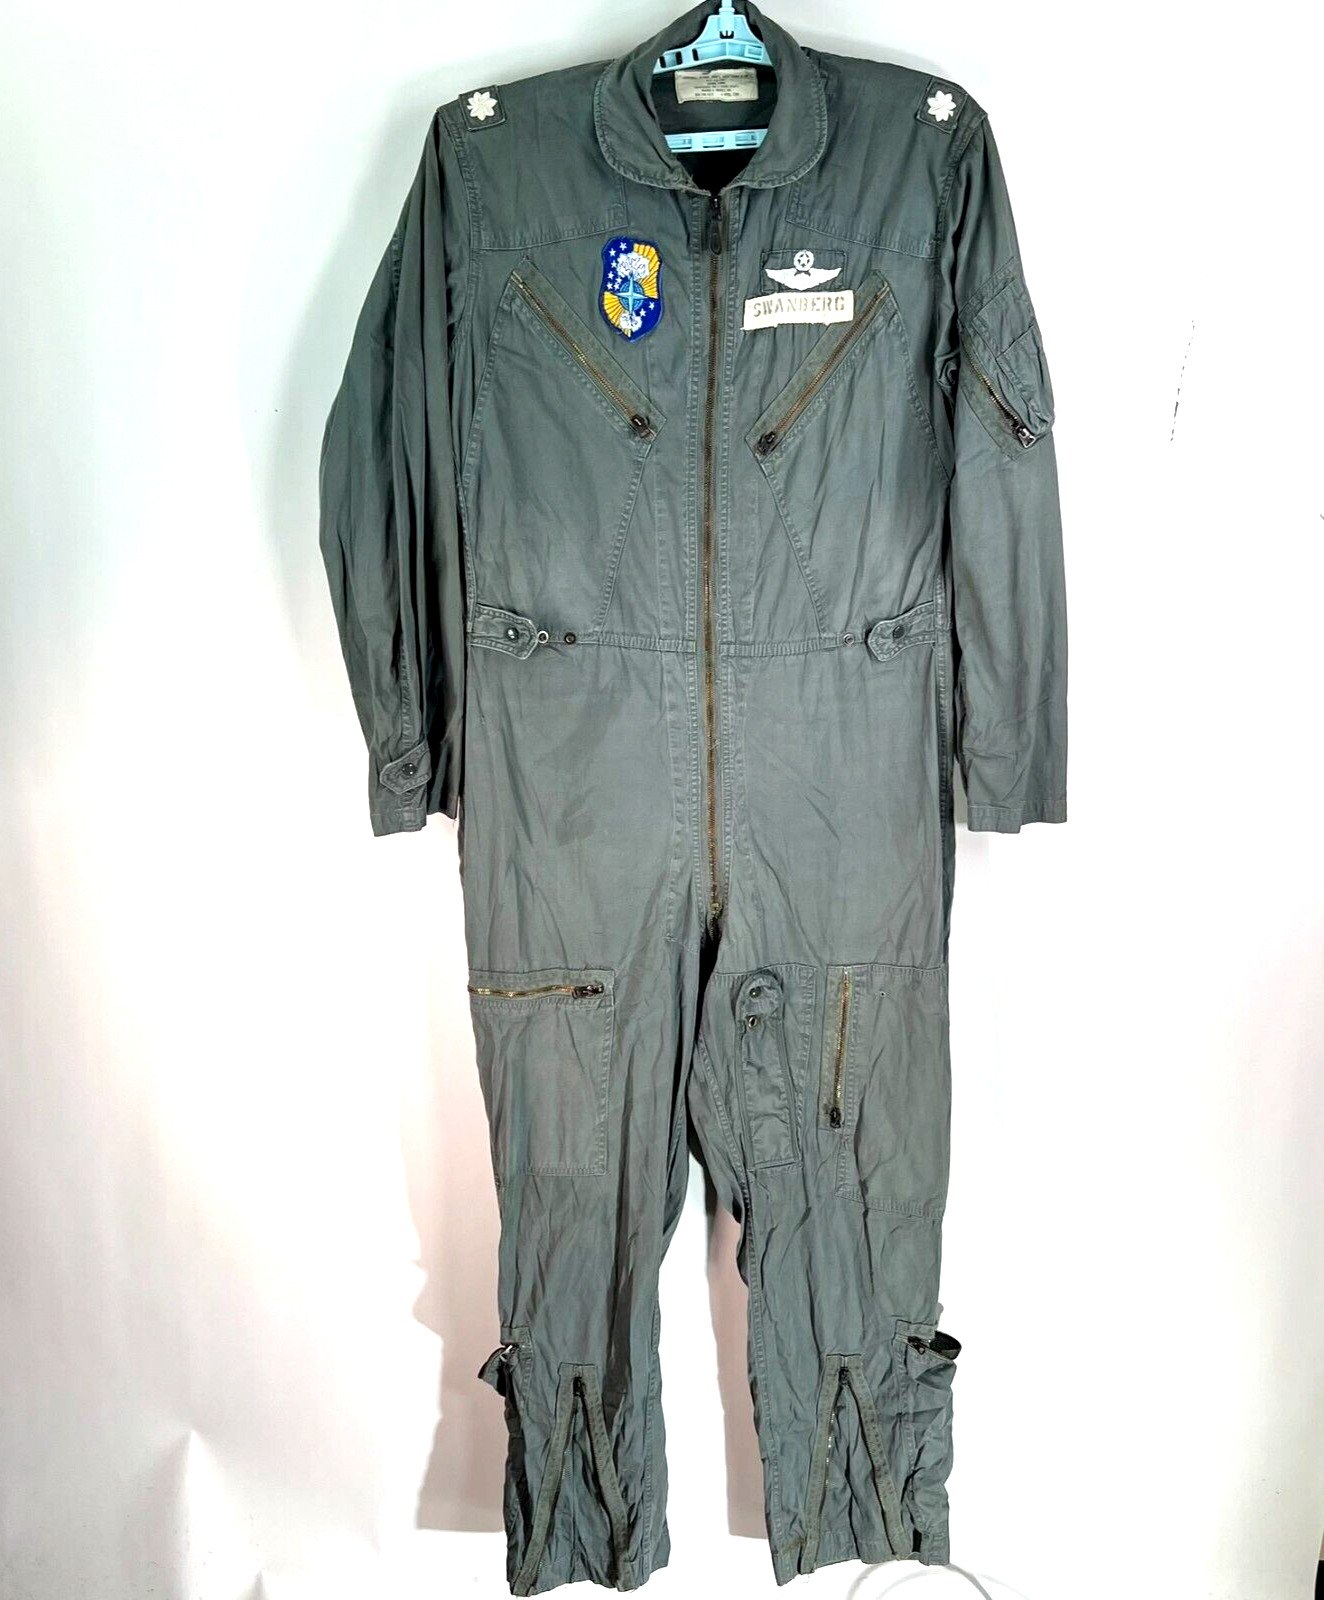 VTG 1966 VIETNAM USAF COVERALL FLYING MEN'S VERY LIGHT K-2B LARGE LONG W Patches